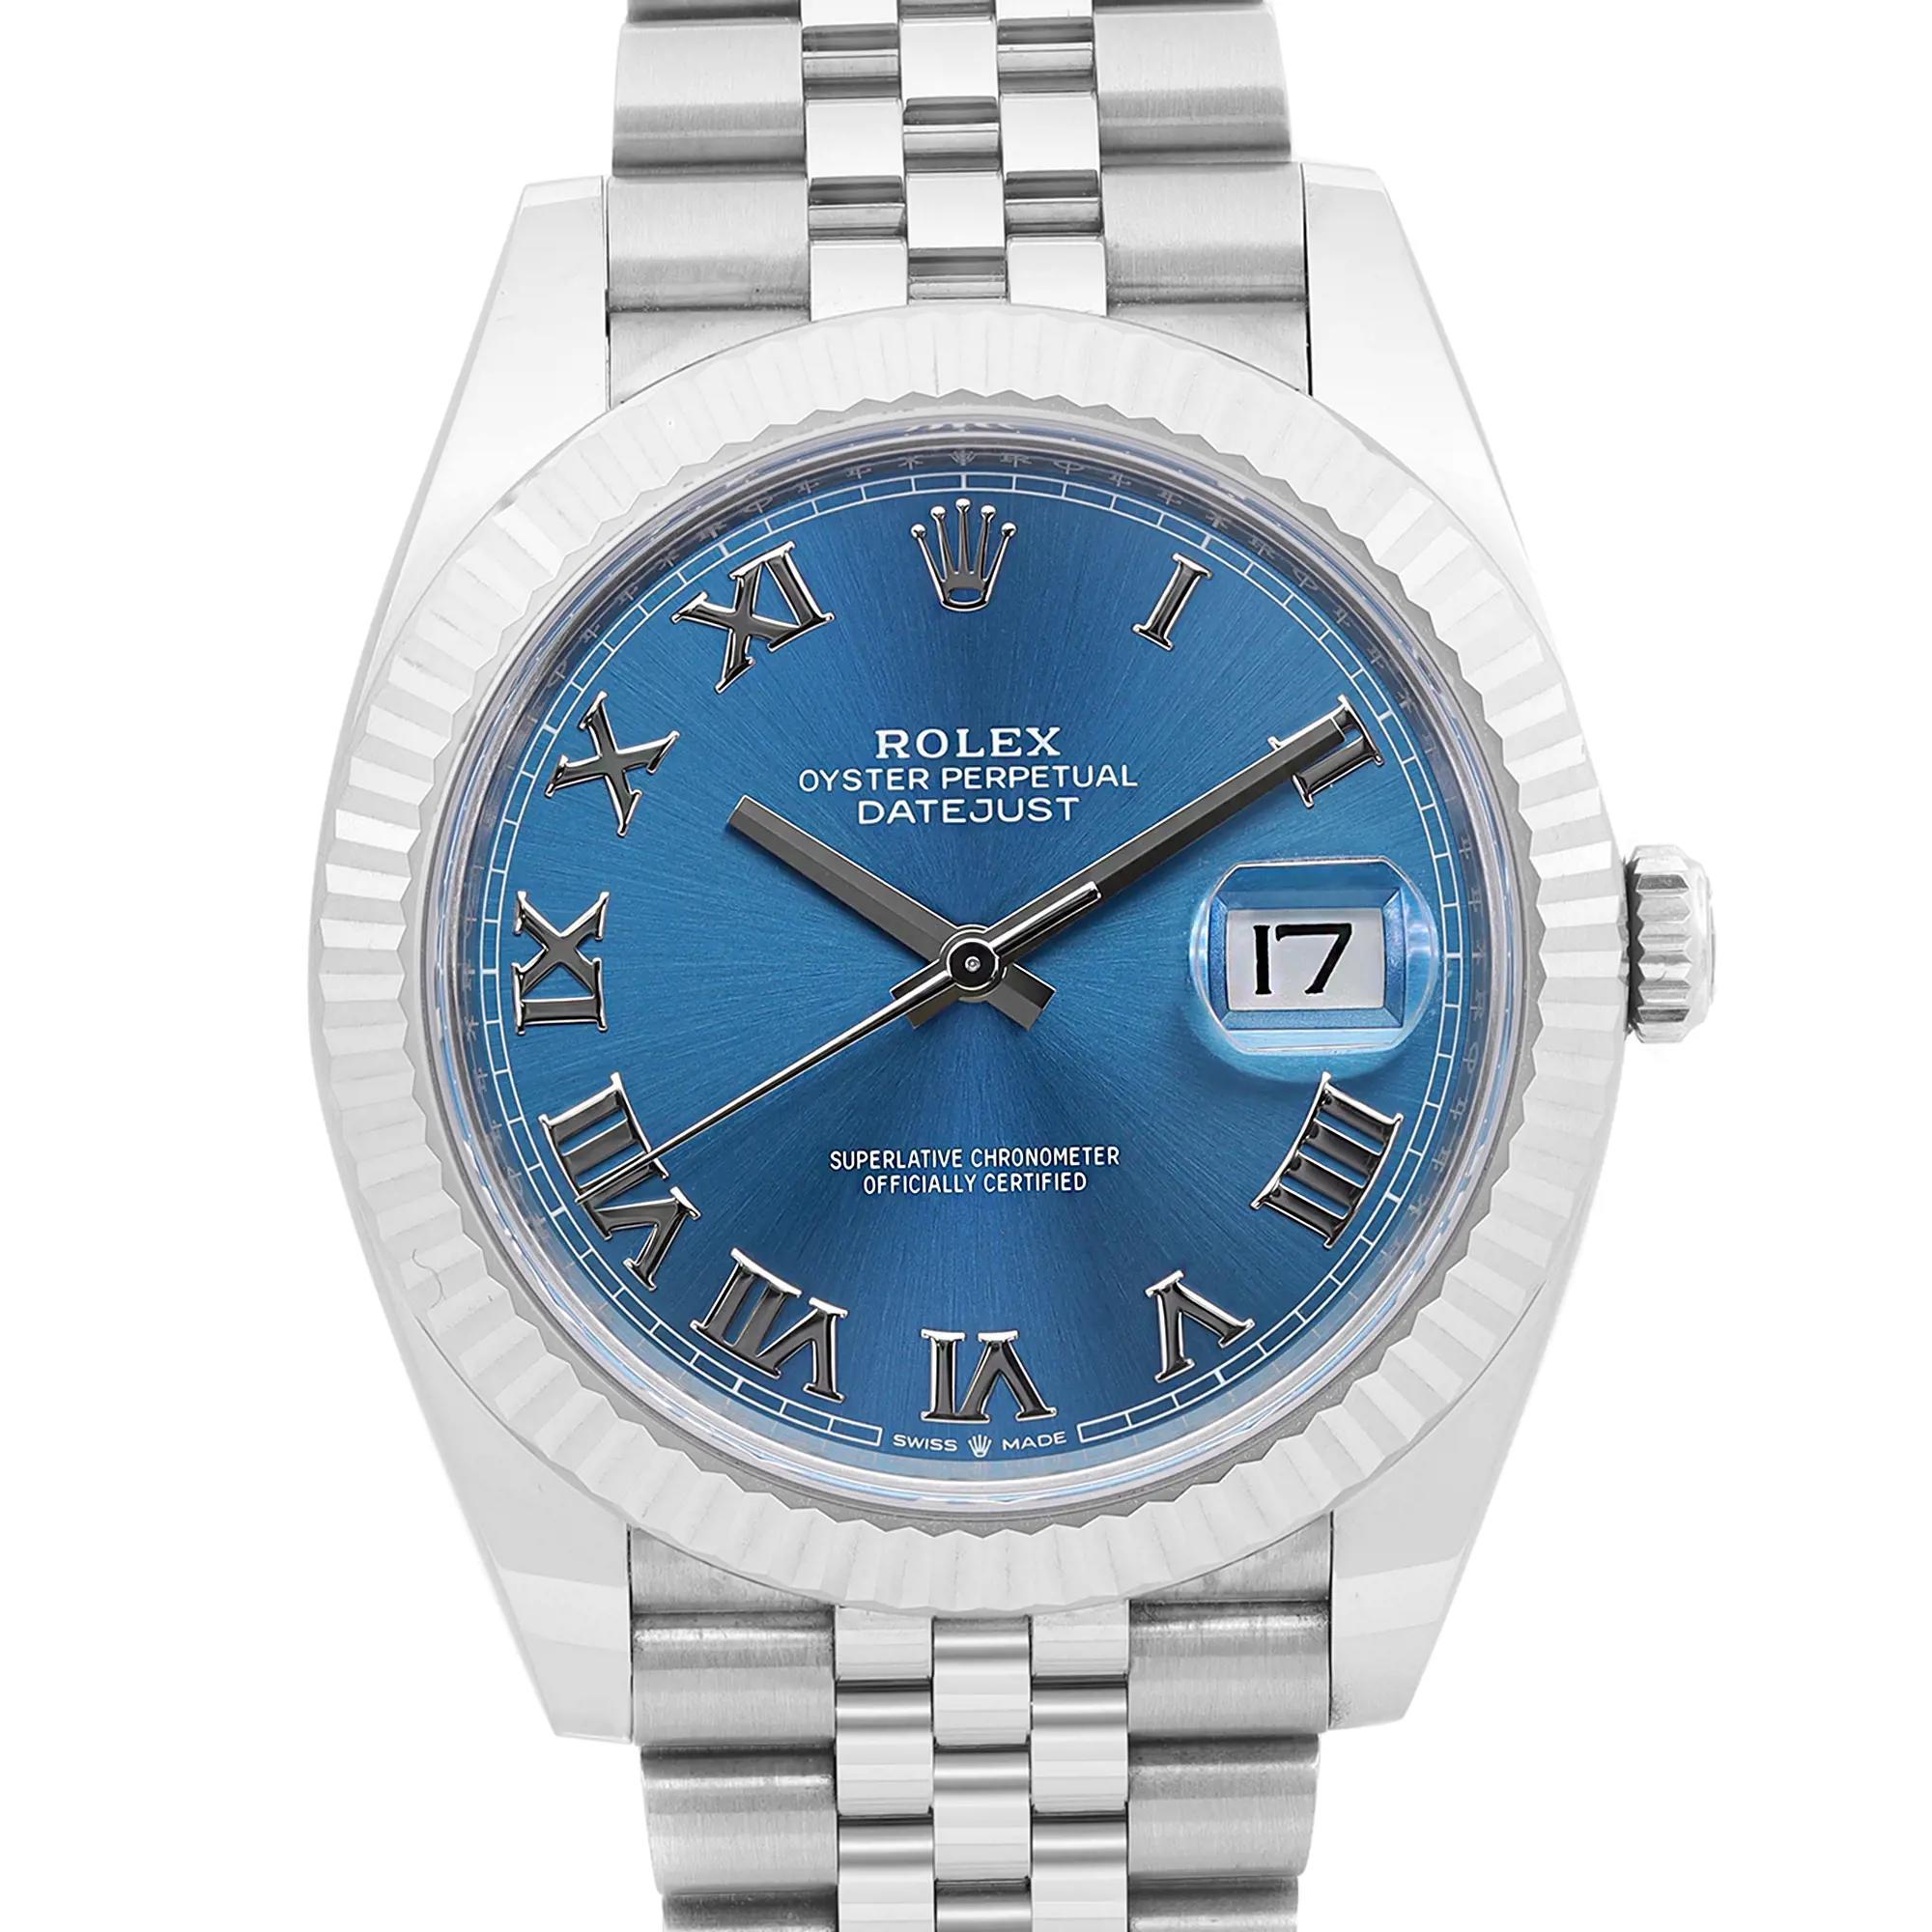 2022 Dated card. Original box and paper included.

Brand: Rolex  Type: Wristwatch  Department: Men  Model Number: 126334  Country/Region of Manufacture: Switzerland  Style: Luxury  Model: Rolex Datejust 126334  Vintage: No  Movement: Mechanical